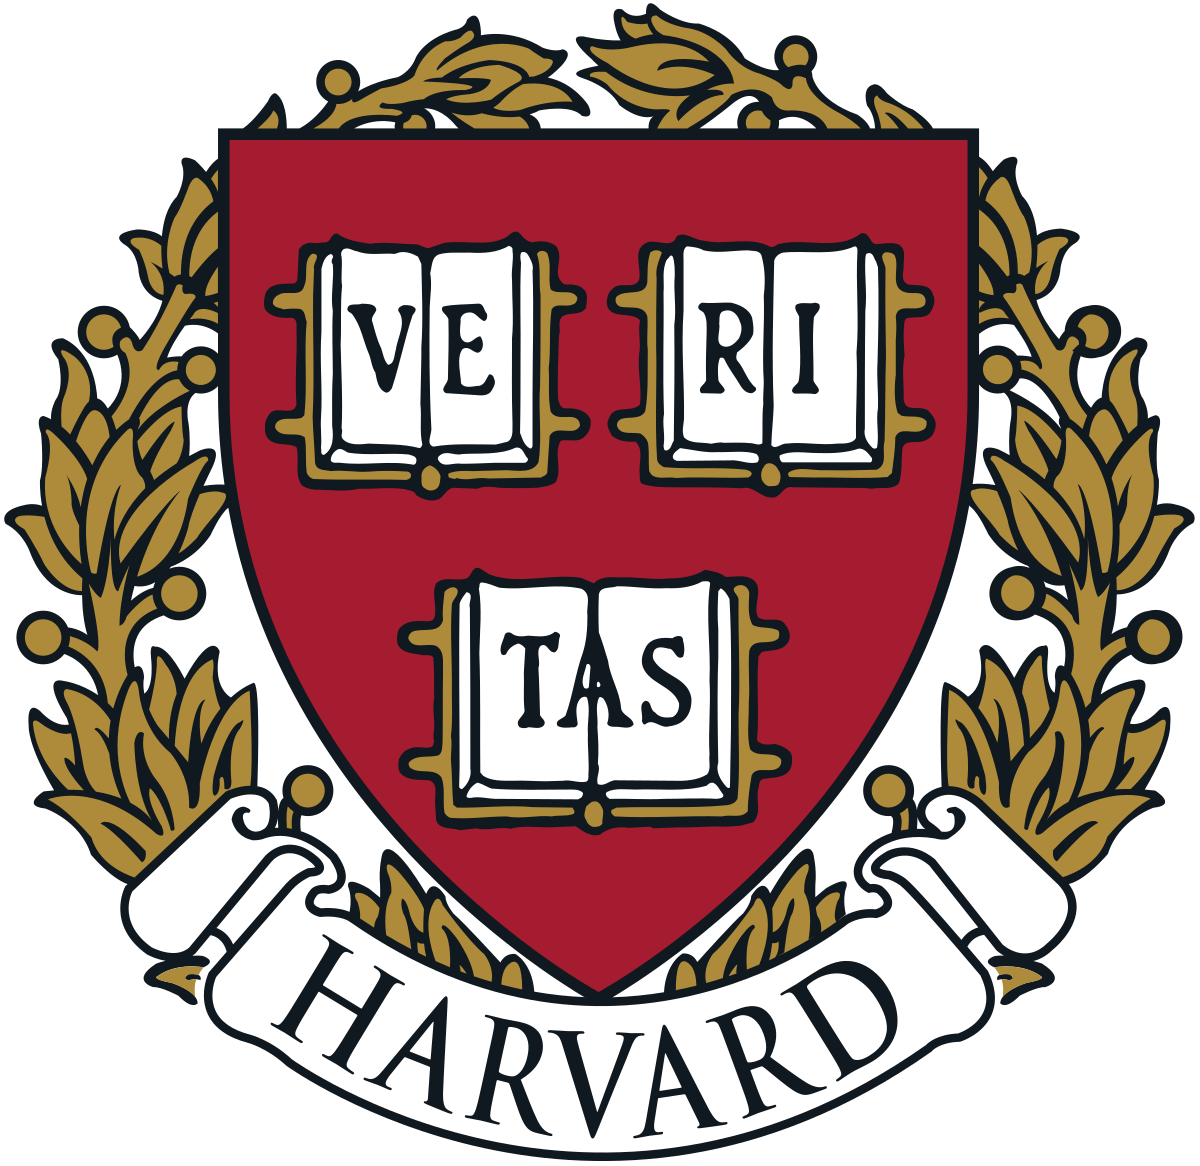 The Harvard University logo is a gold wreath with a red badge in the centre with the word "veritas" on the badge.